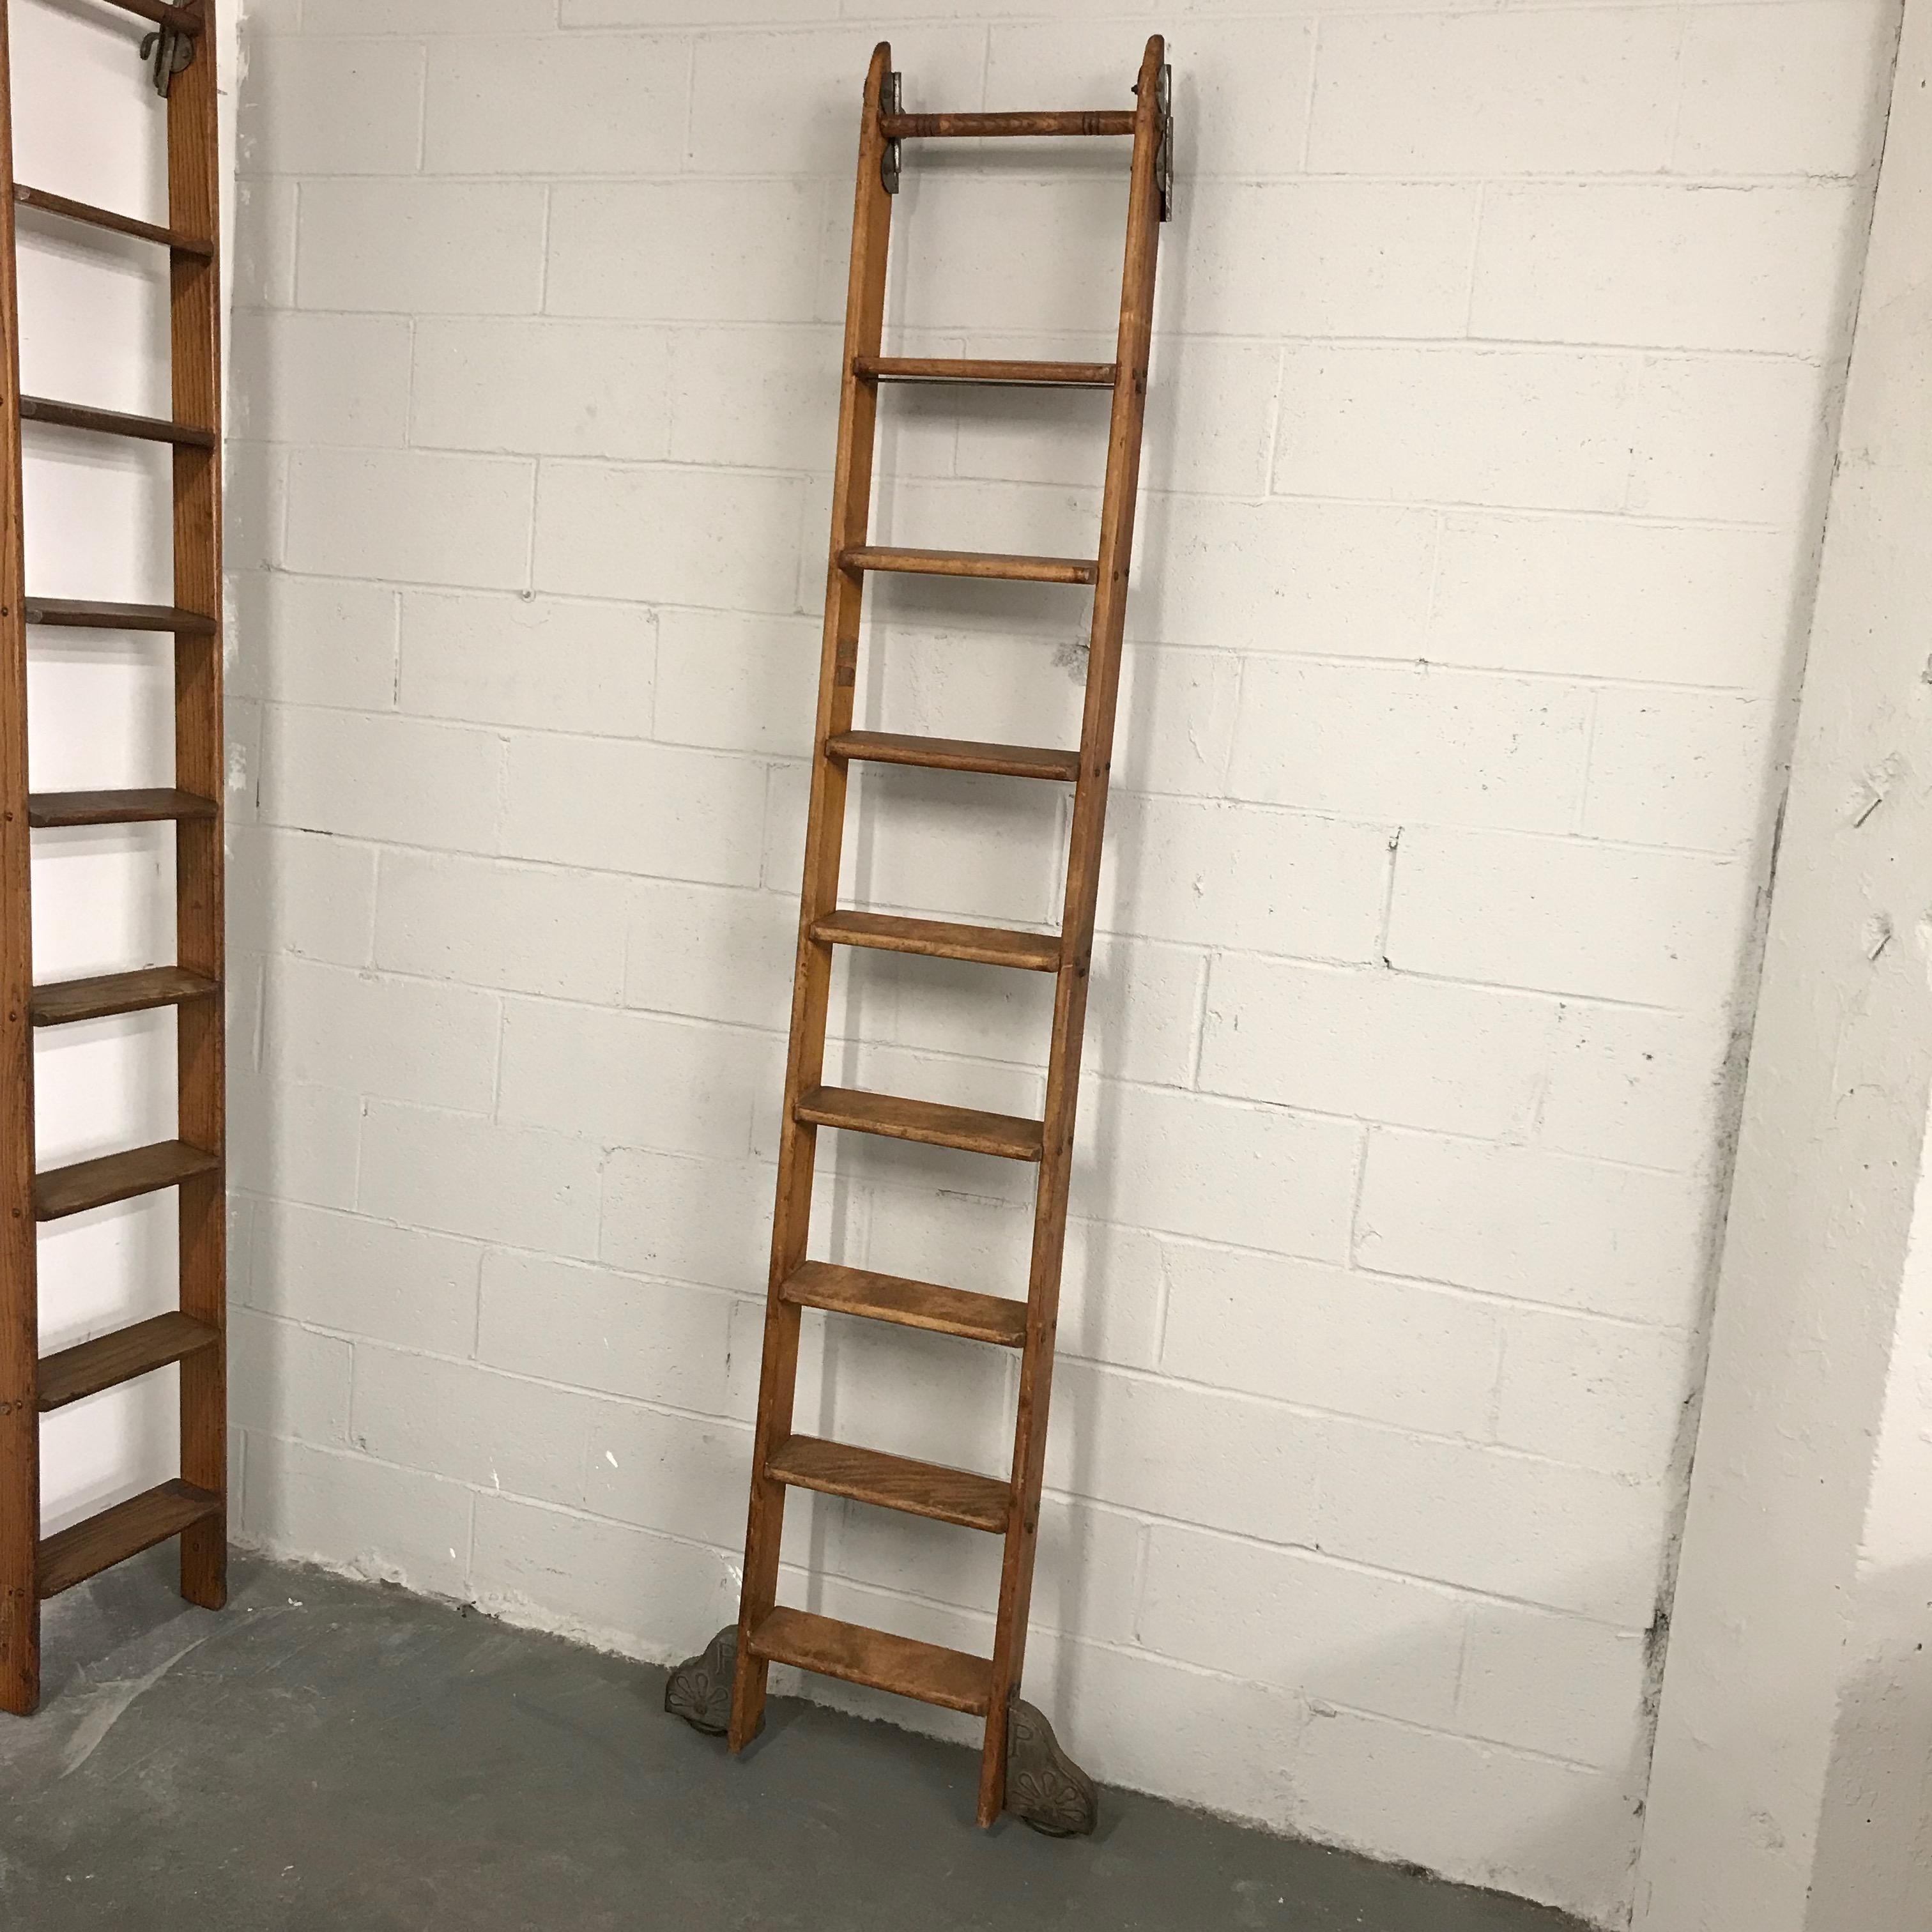 Industrial, rolling, oak library ladder by Putnam features decorative steel hardware, hooks at the top and lateral wheels at the bottom. The rungs are 4 inches wide and the wheels measure 27 inches wide.